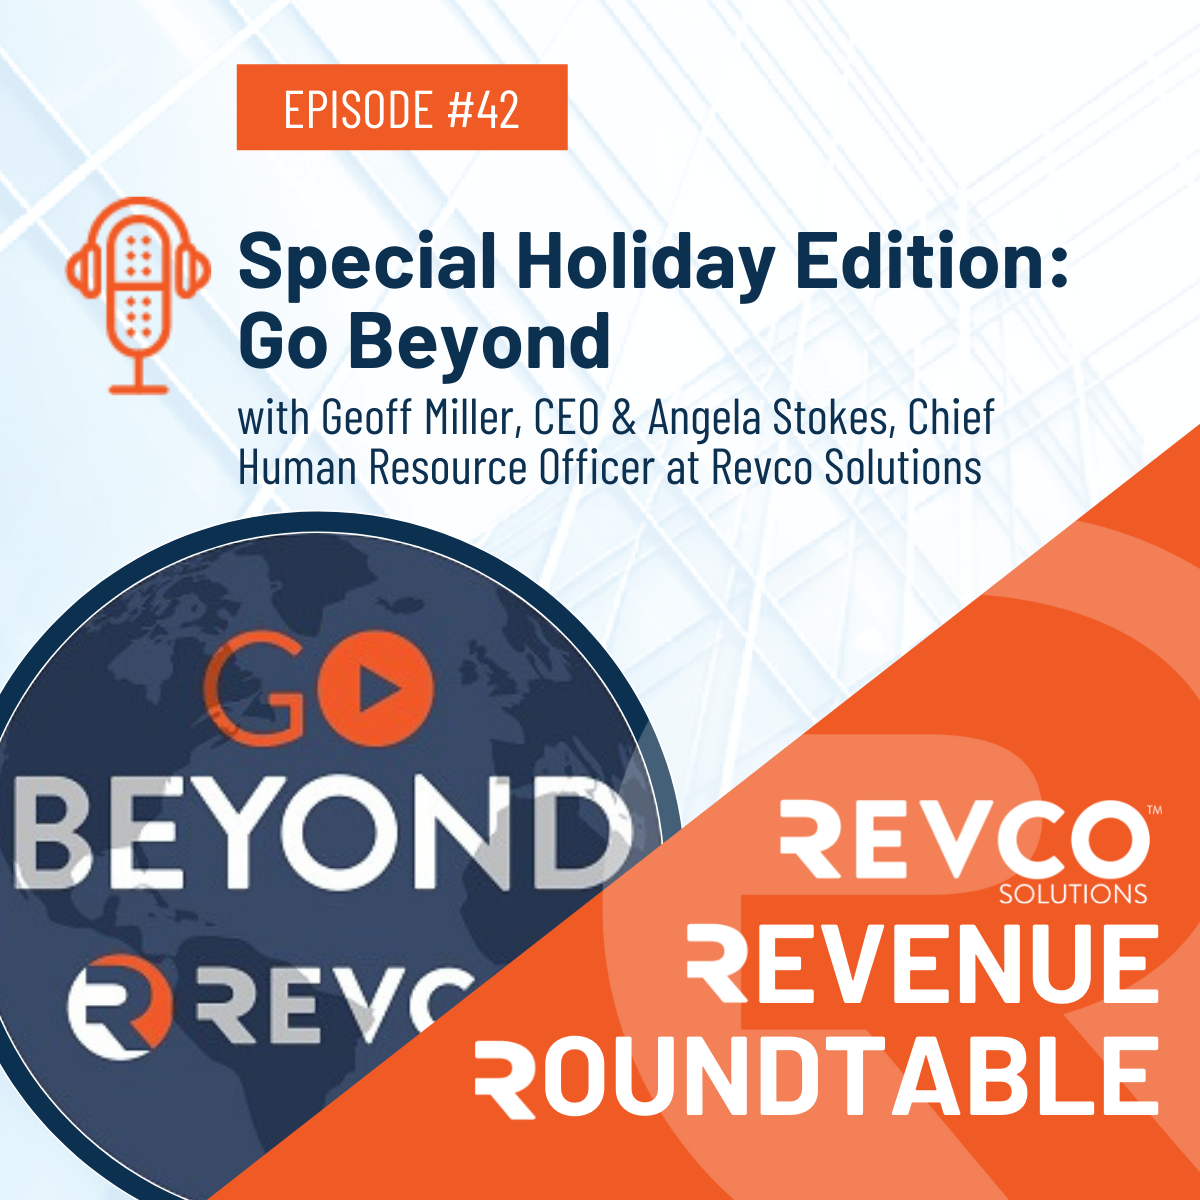 Revenue Roundtable Podcast Ep. 42 - Special Edition: Go Beyond